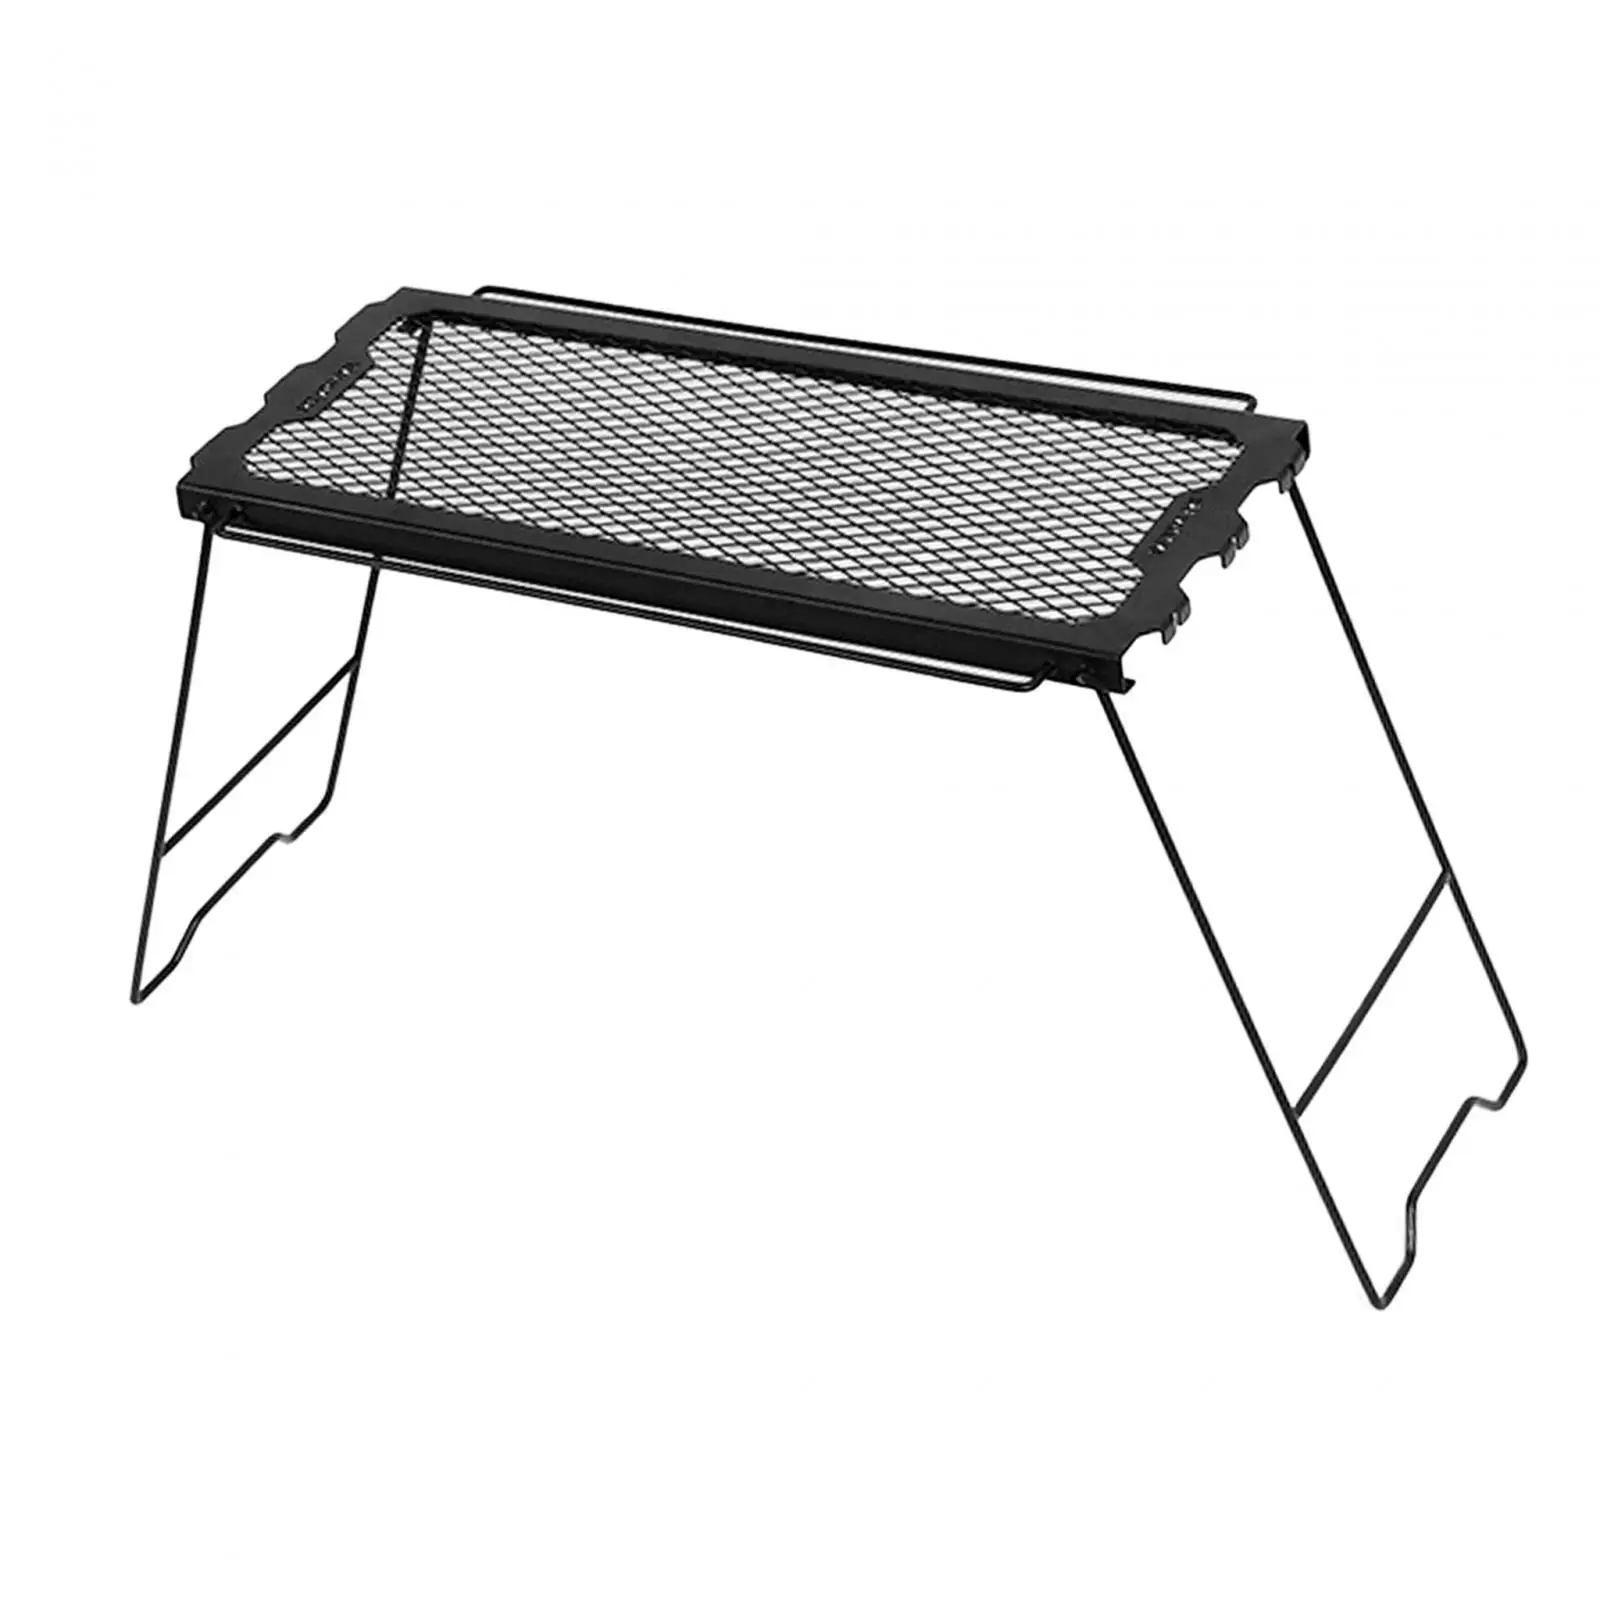 Folding Camping Table Camping Cooking Grate over Fire Compact Small Table Folding Campfire Grill for Backpacking Beach